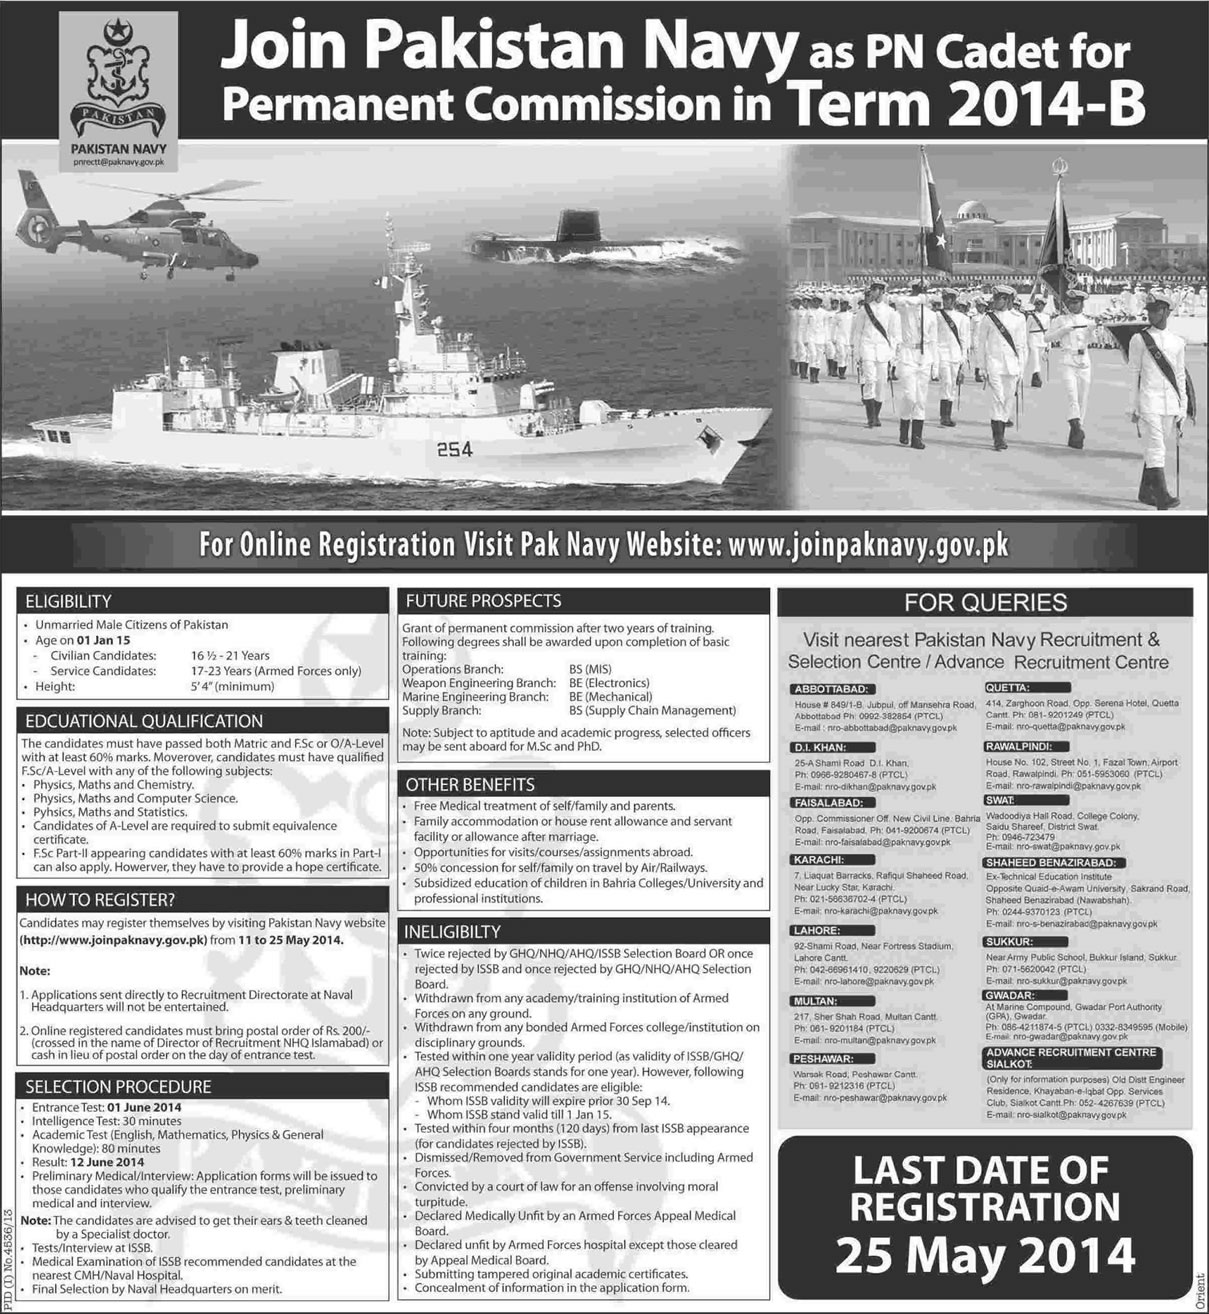 Join Pak Navy as PN Cadet 2014 - B Term for Permanent Commission